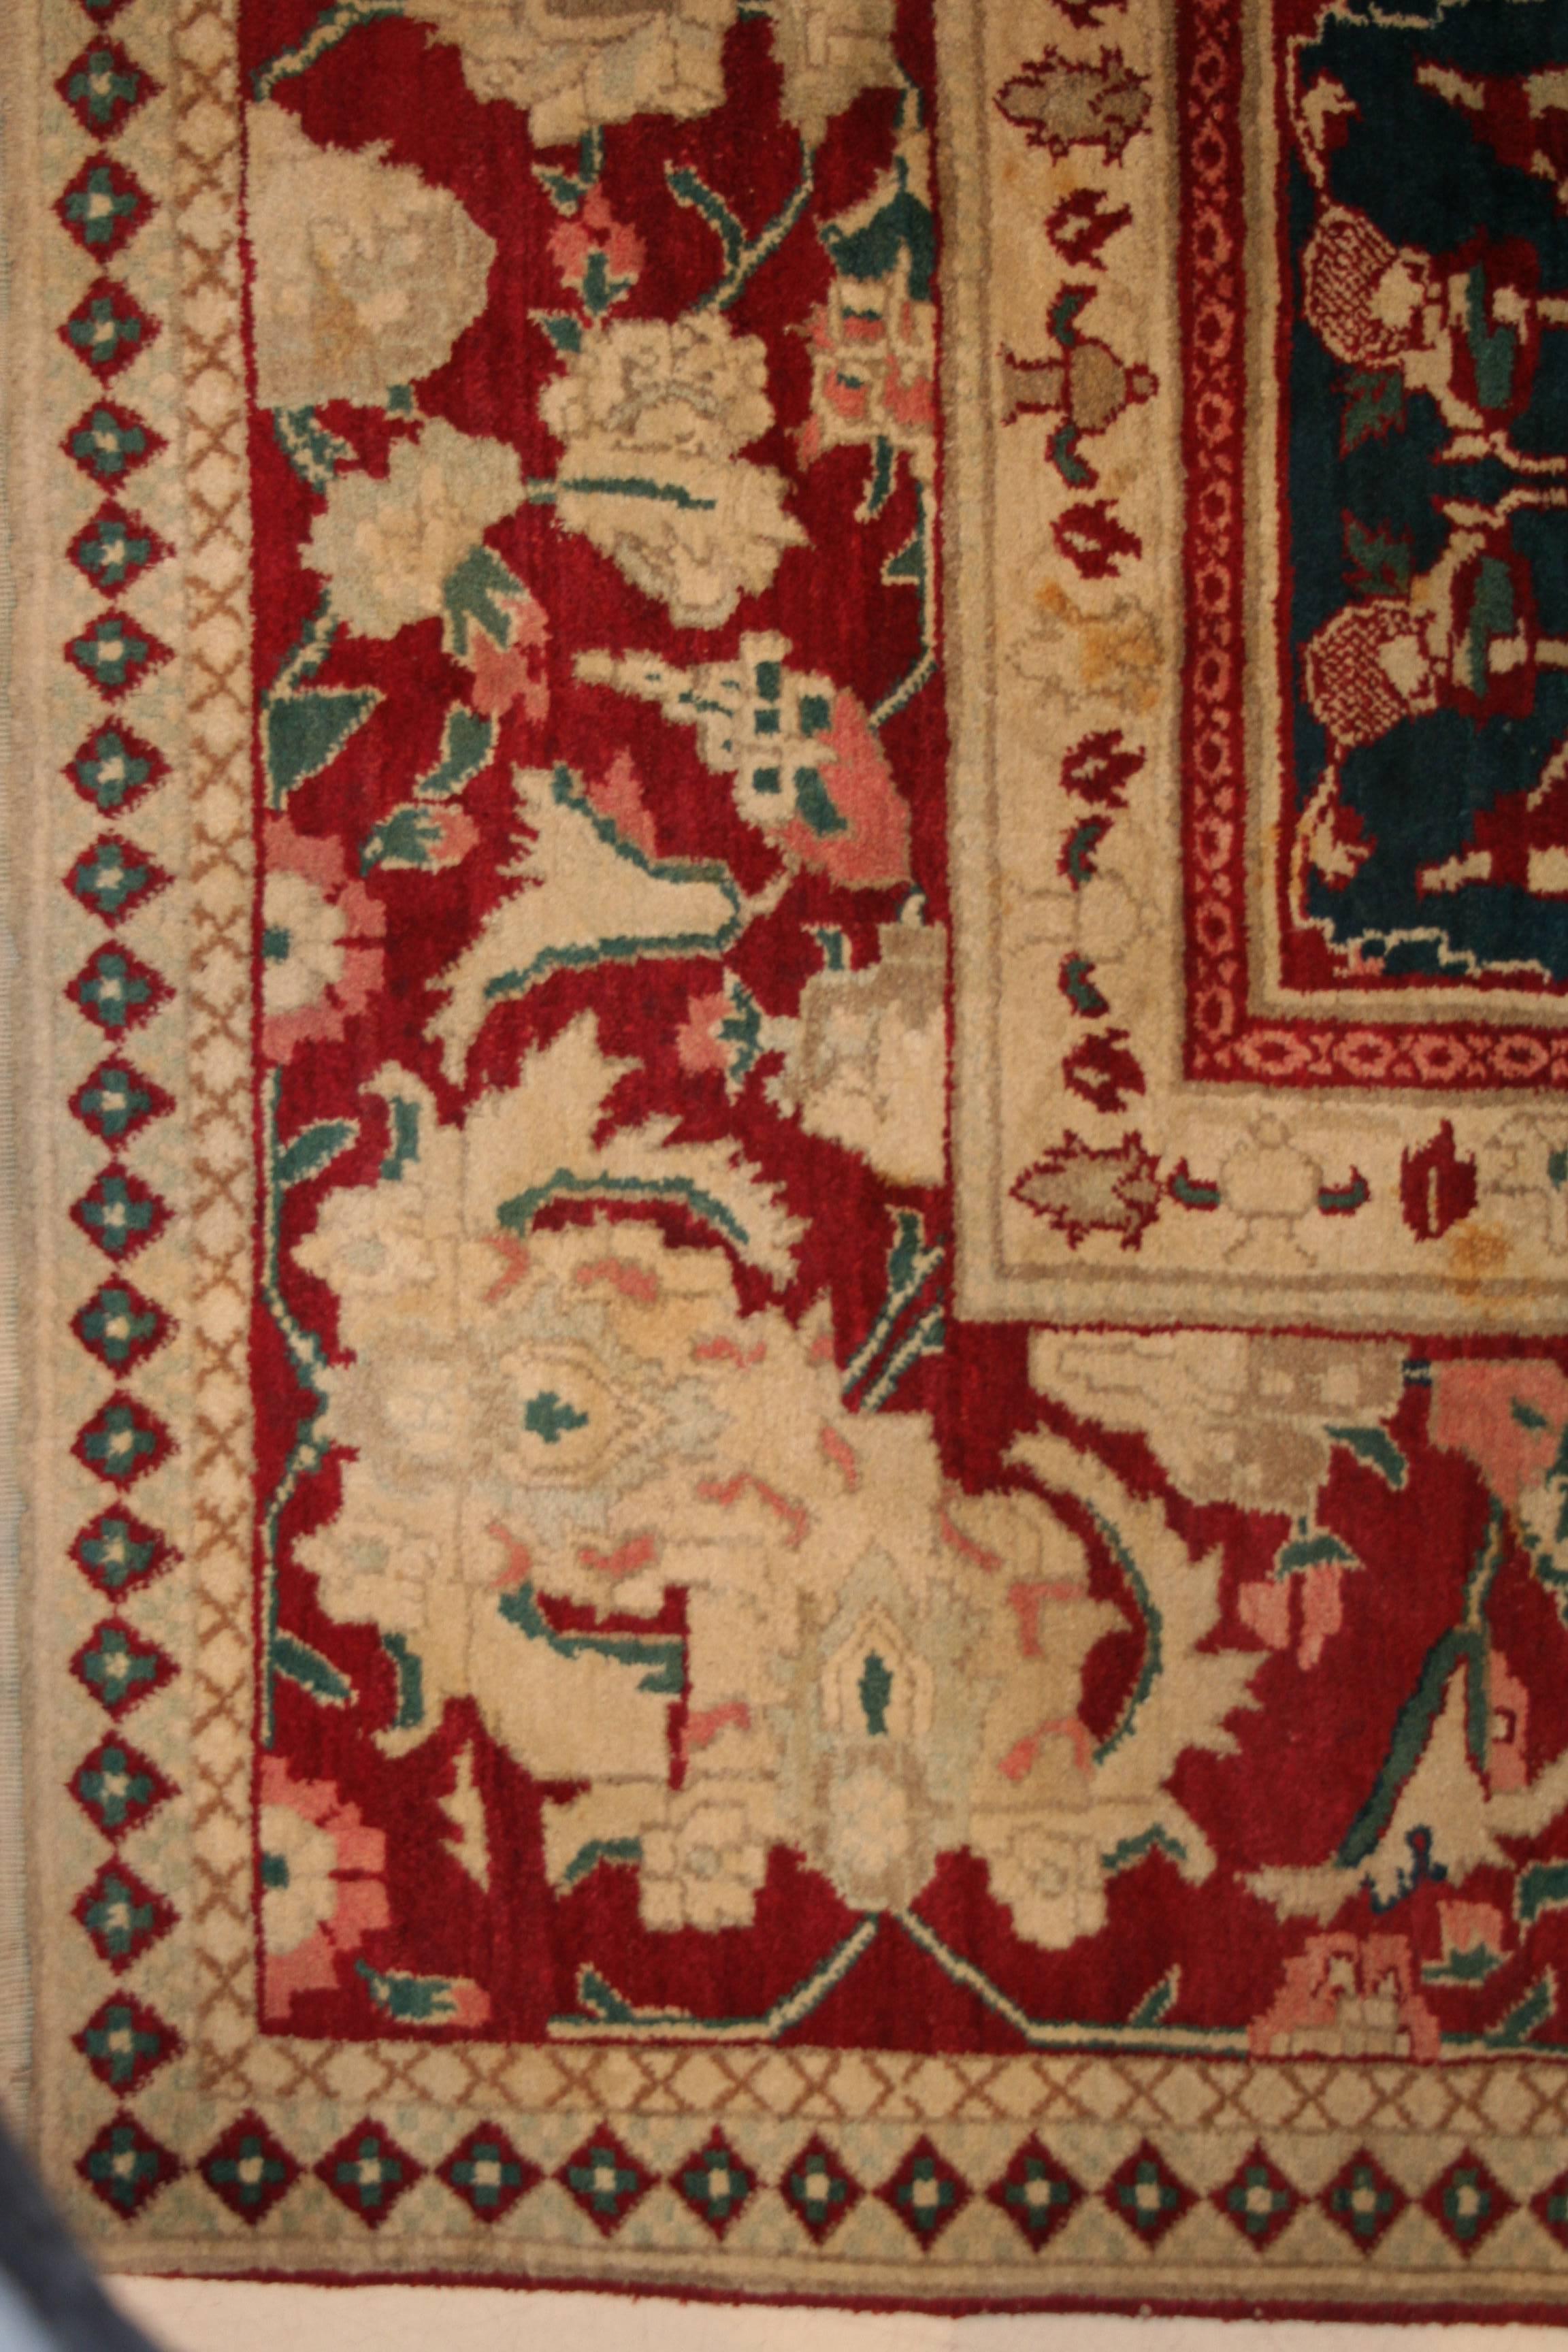 Agra carpets have historically been regarded among the most refined decorative carpets. They were commissioned by British nobility during the colonial period to adorn their castles and palaces. This finely woven example, in excellent condition, is